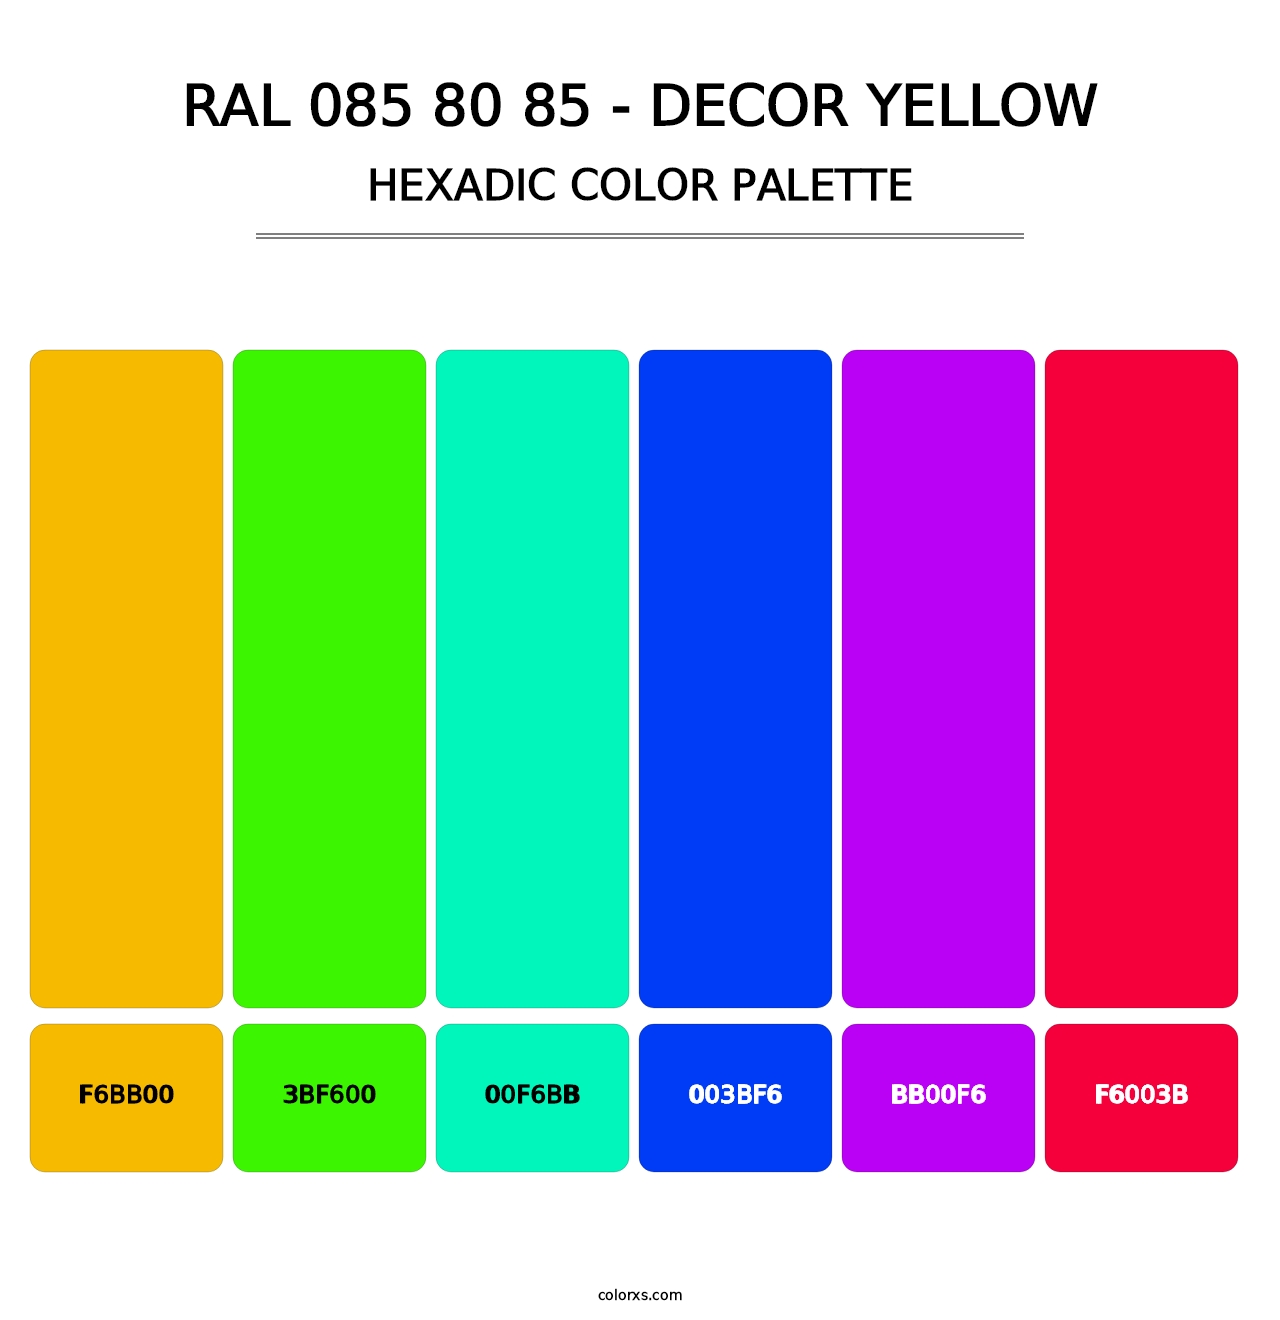 RAL 085 80 85 - Decor Yellow - Hexadic Color Palette